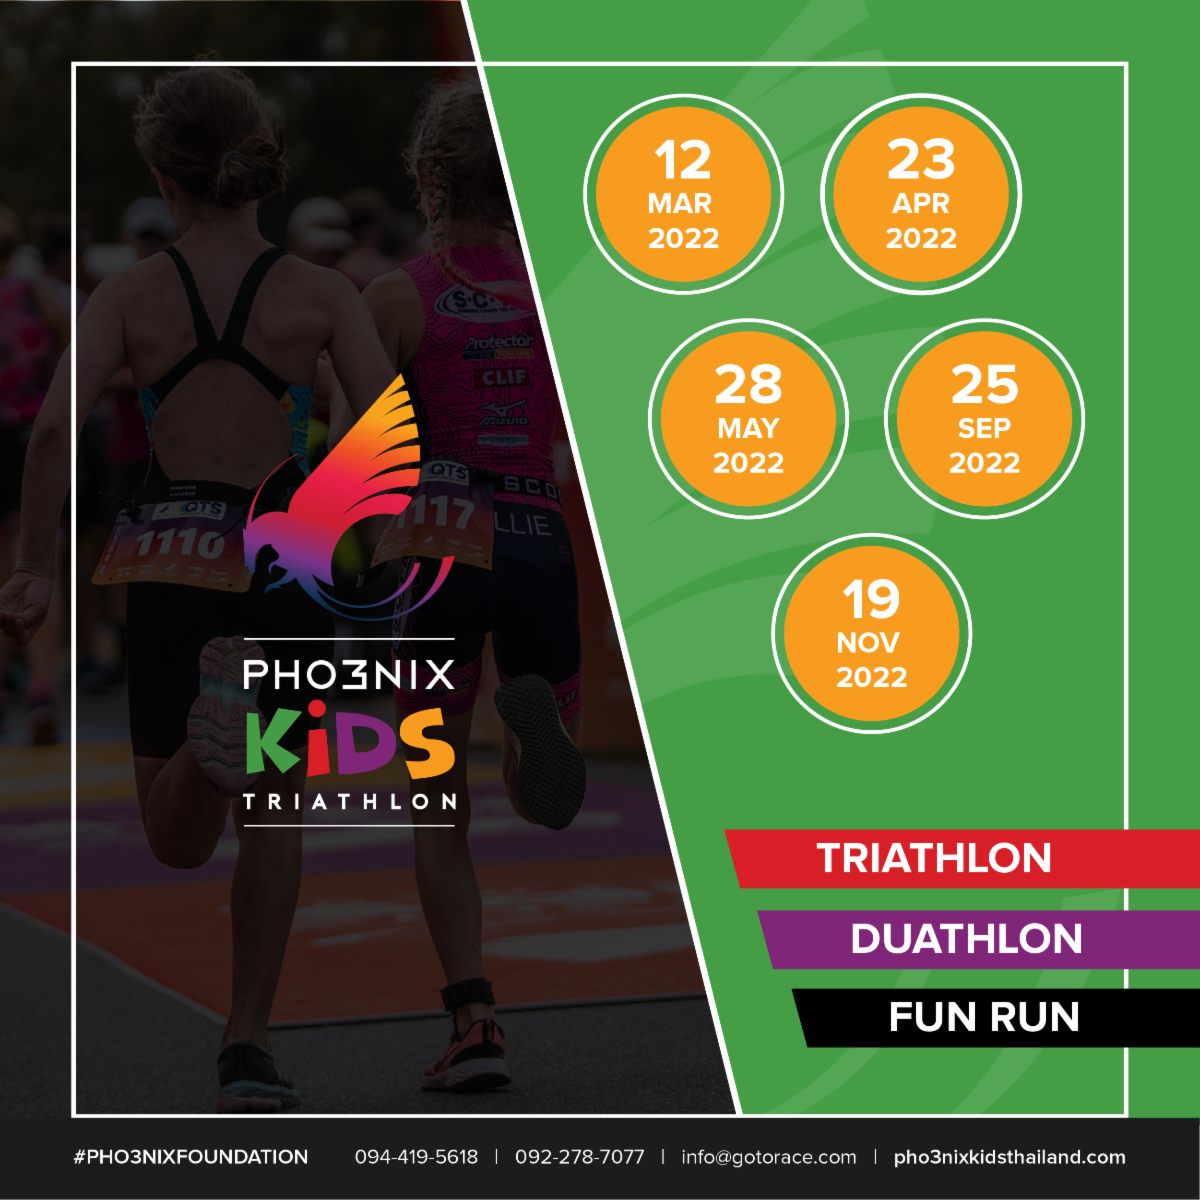 Less than a month until the first ever Pho3nix Kids Triathlon in Asia – Don’t miss it!